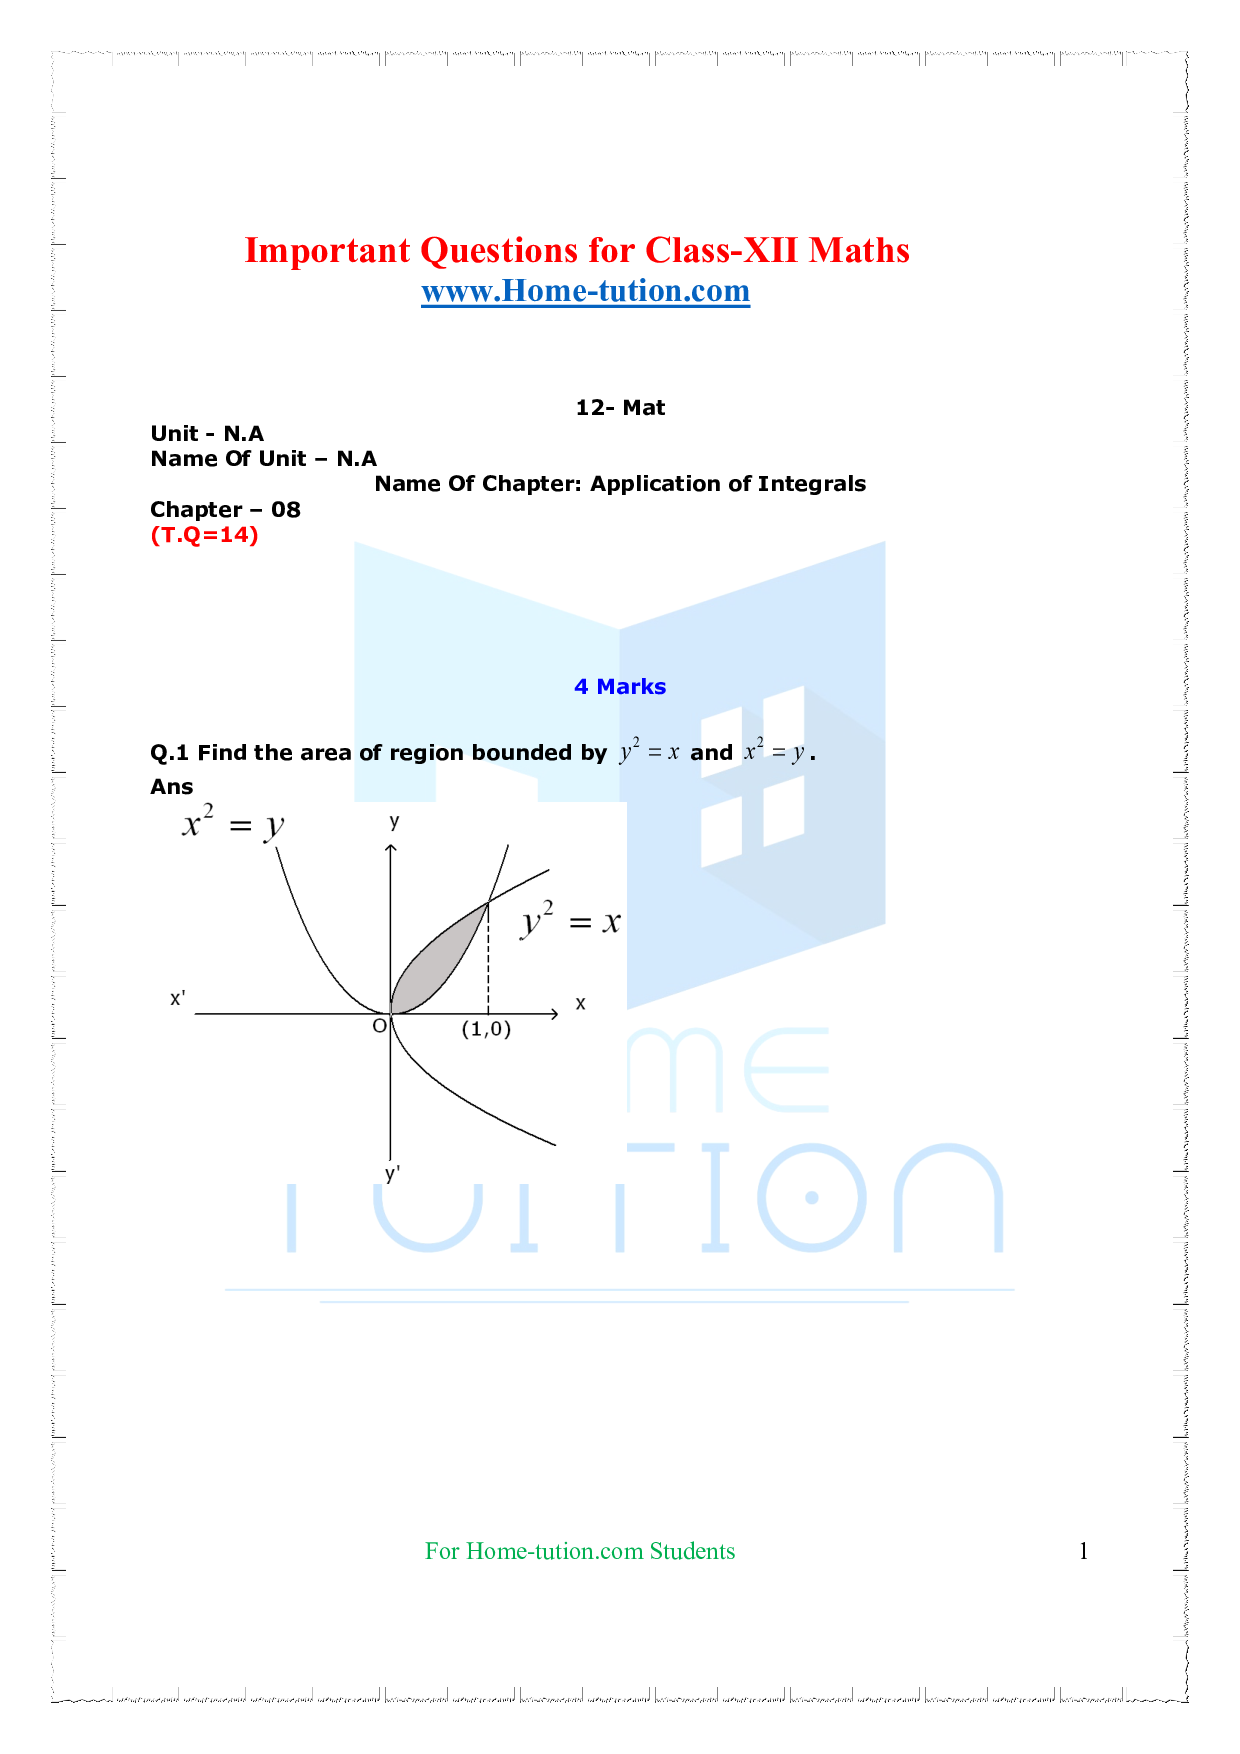 Chapter 8 Applications of Integrals Important Questions